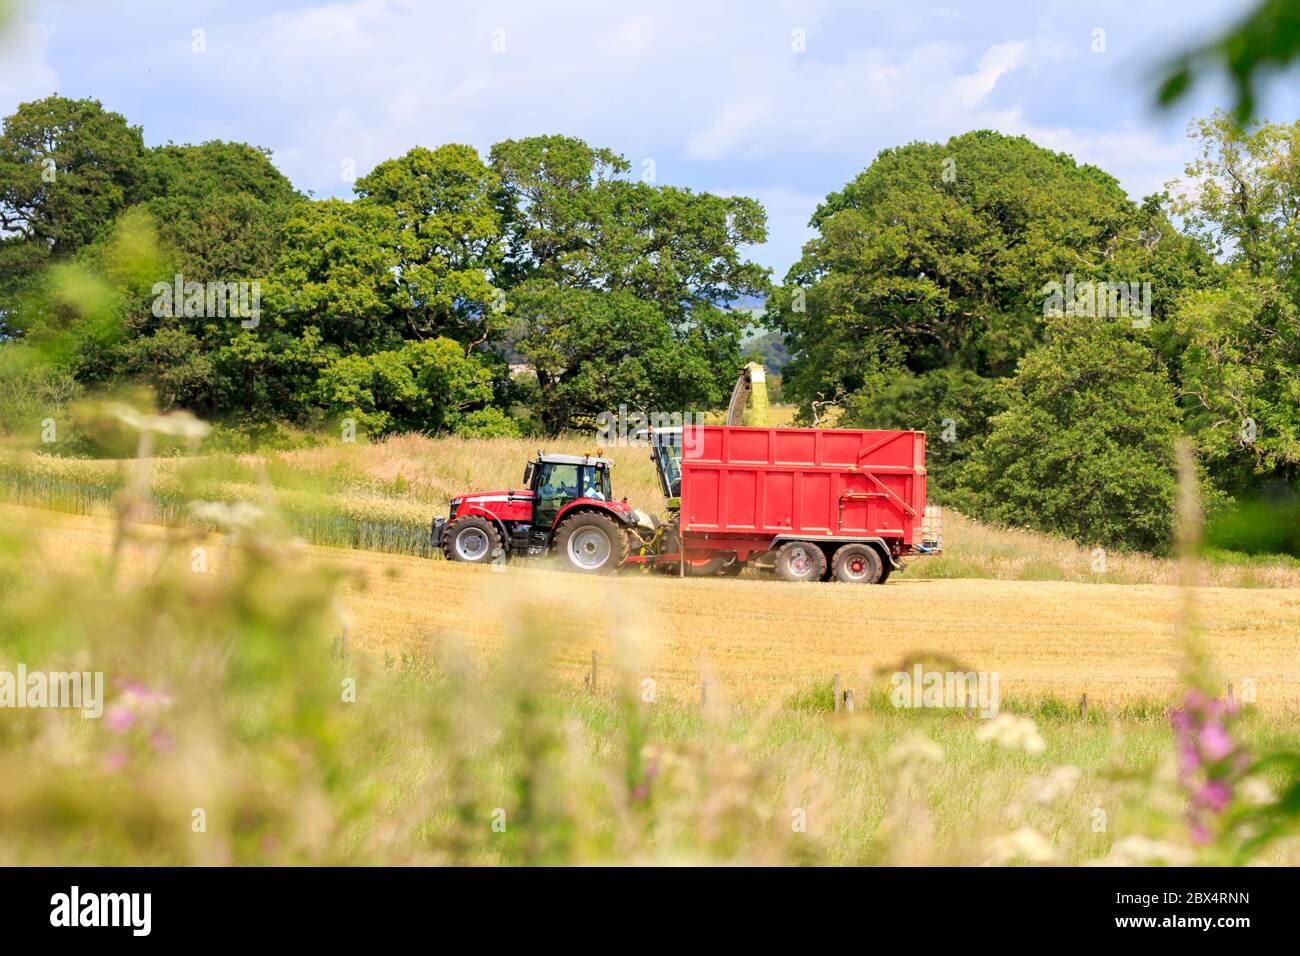 Tractor with trailer and Forage harvester harvesting cereal crop silage Stock Photo